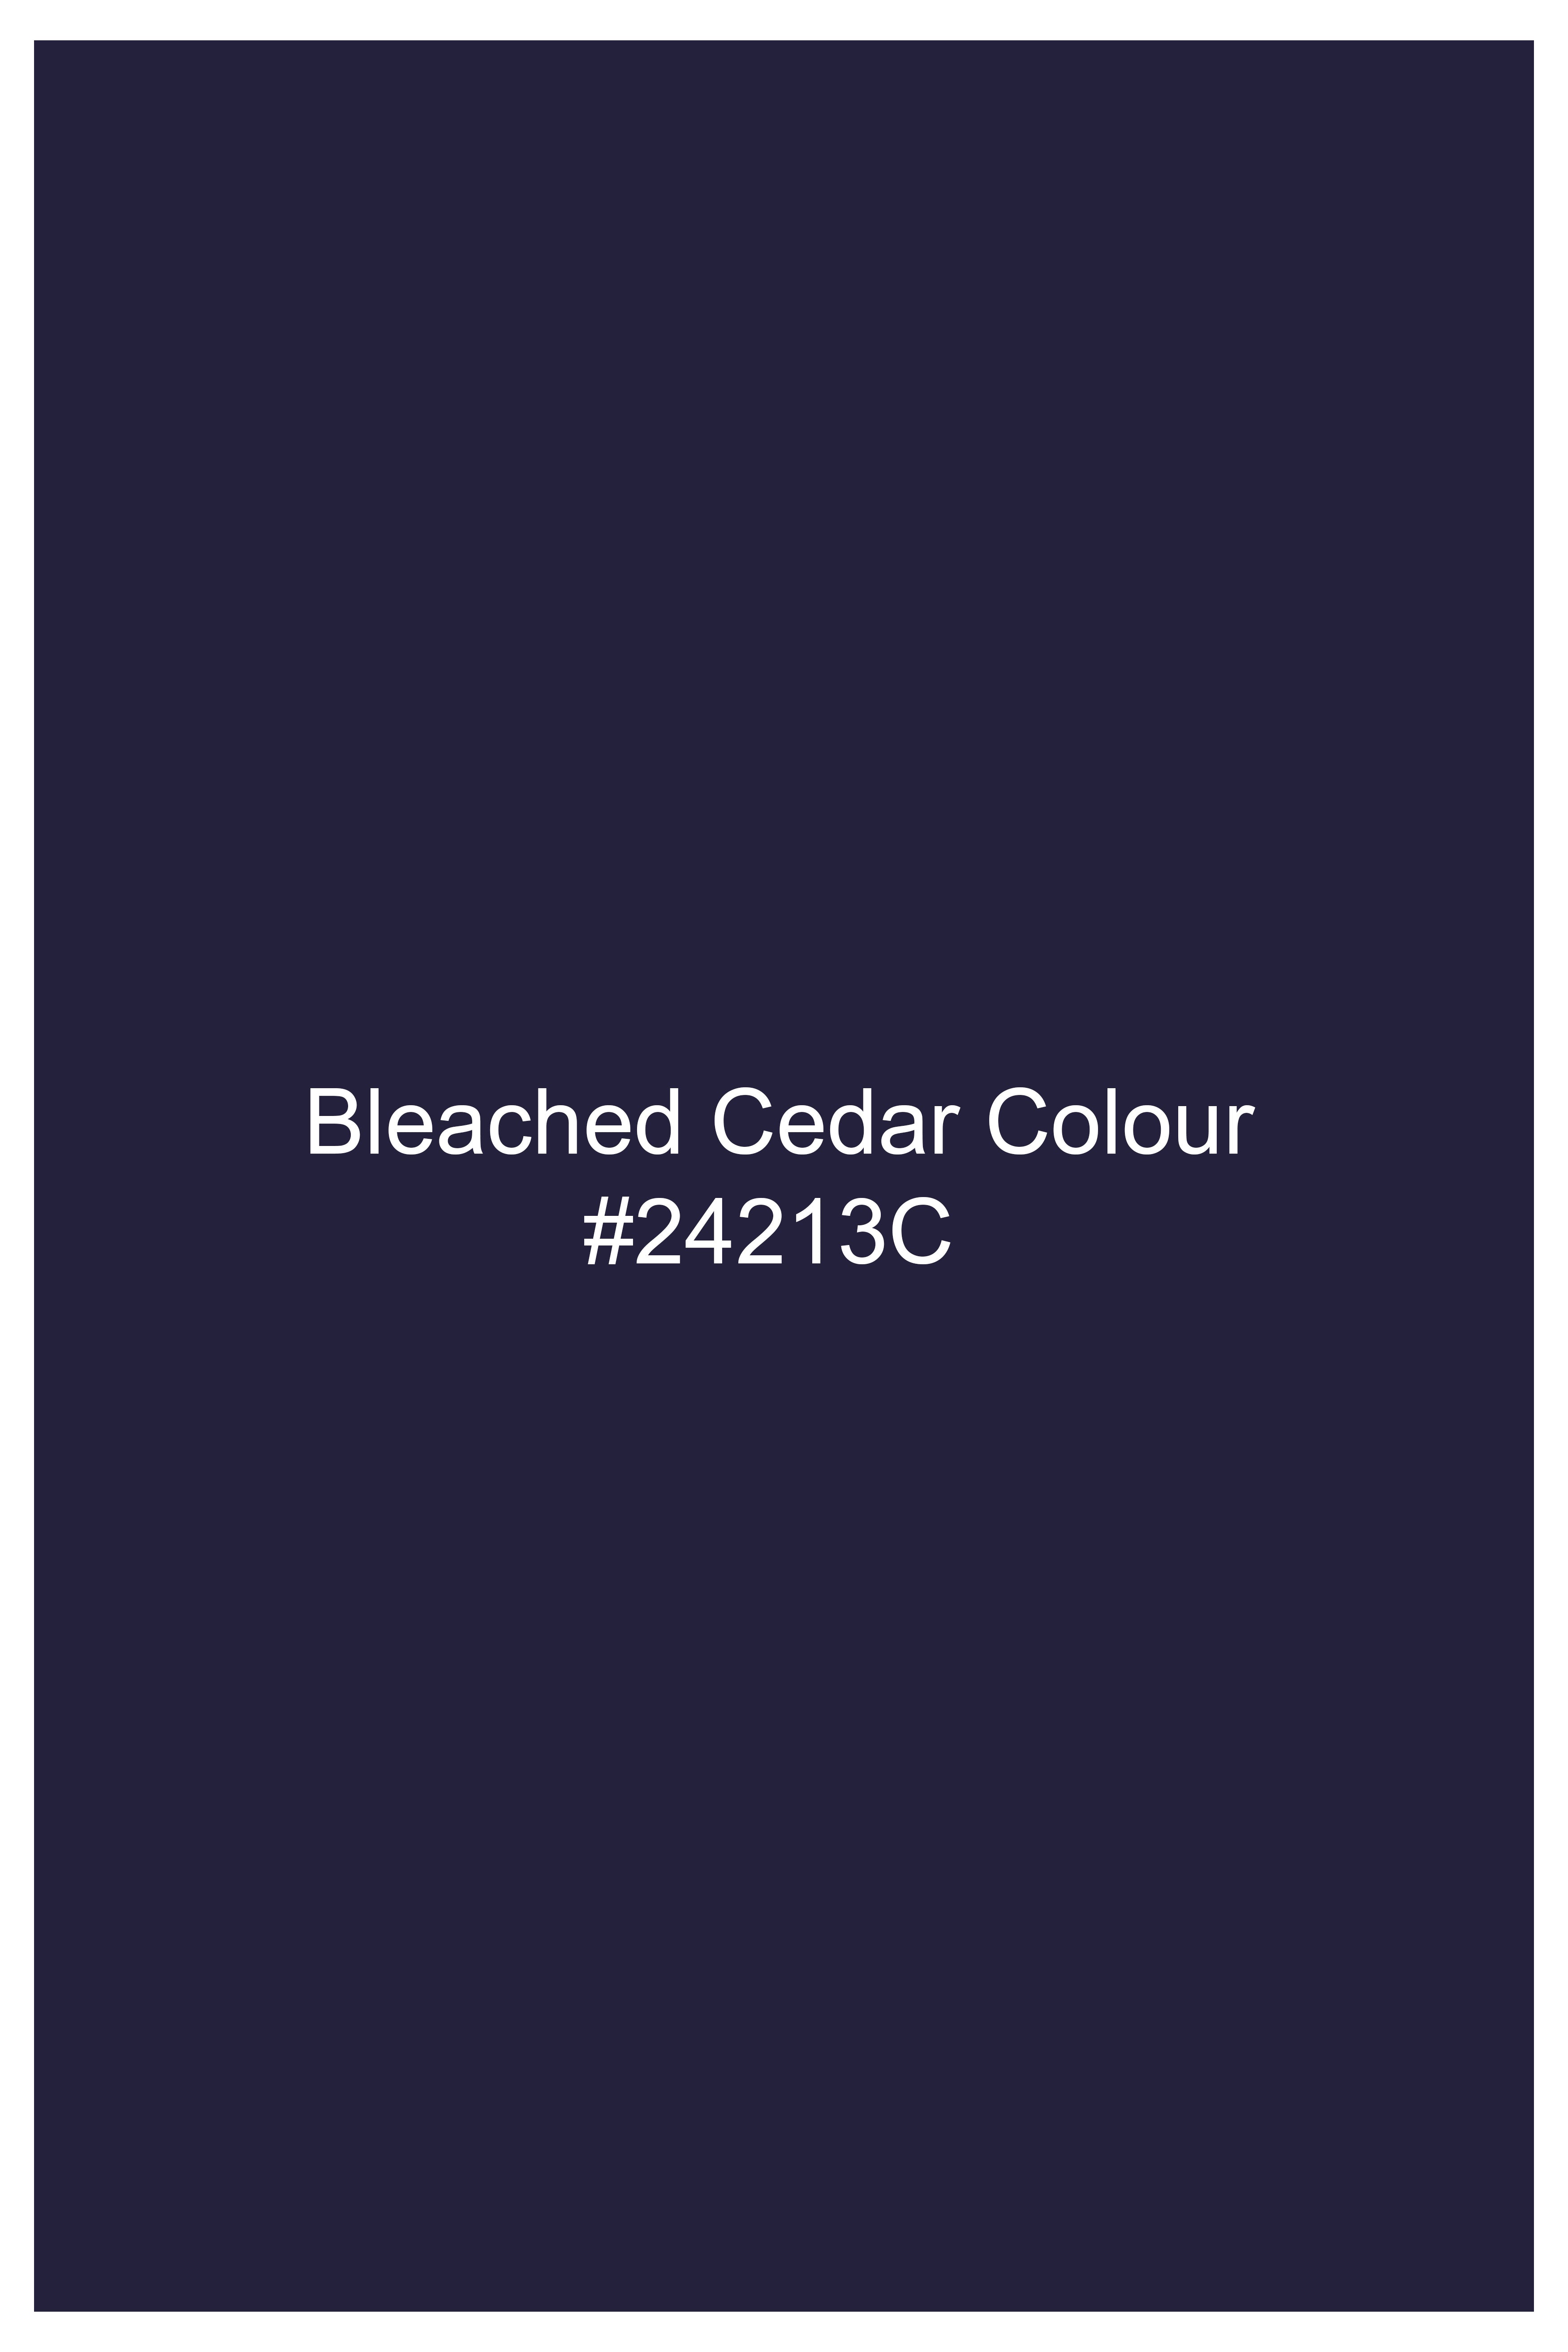 Bleached Cedar Blue Stretchable Wool rich Double Breasted traveler Suit ST2758-DB-36,ST2758-DB-38,ST2758-DB-40,ST2758-DB-42,ST2758-DB-44,ST2758-DB-46,ST2758-DB-48,ST2758-DB-50,ST2758-DB-52,ST2758-DB-54,ST2758-DB-56,ST2758-DB-58,ST2758-DB-60